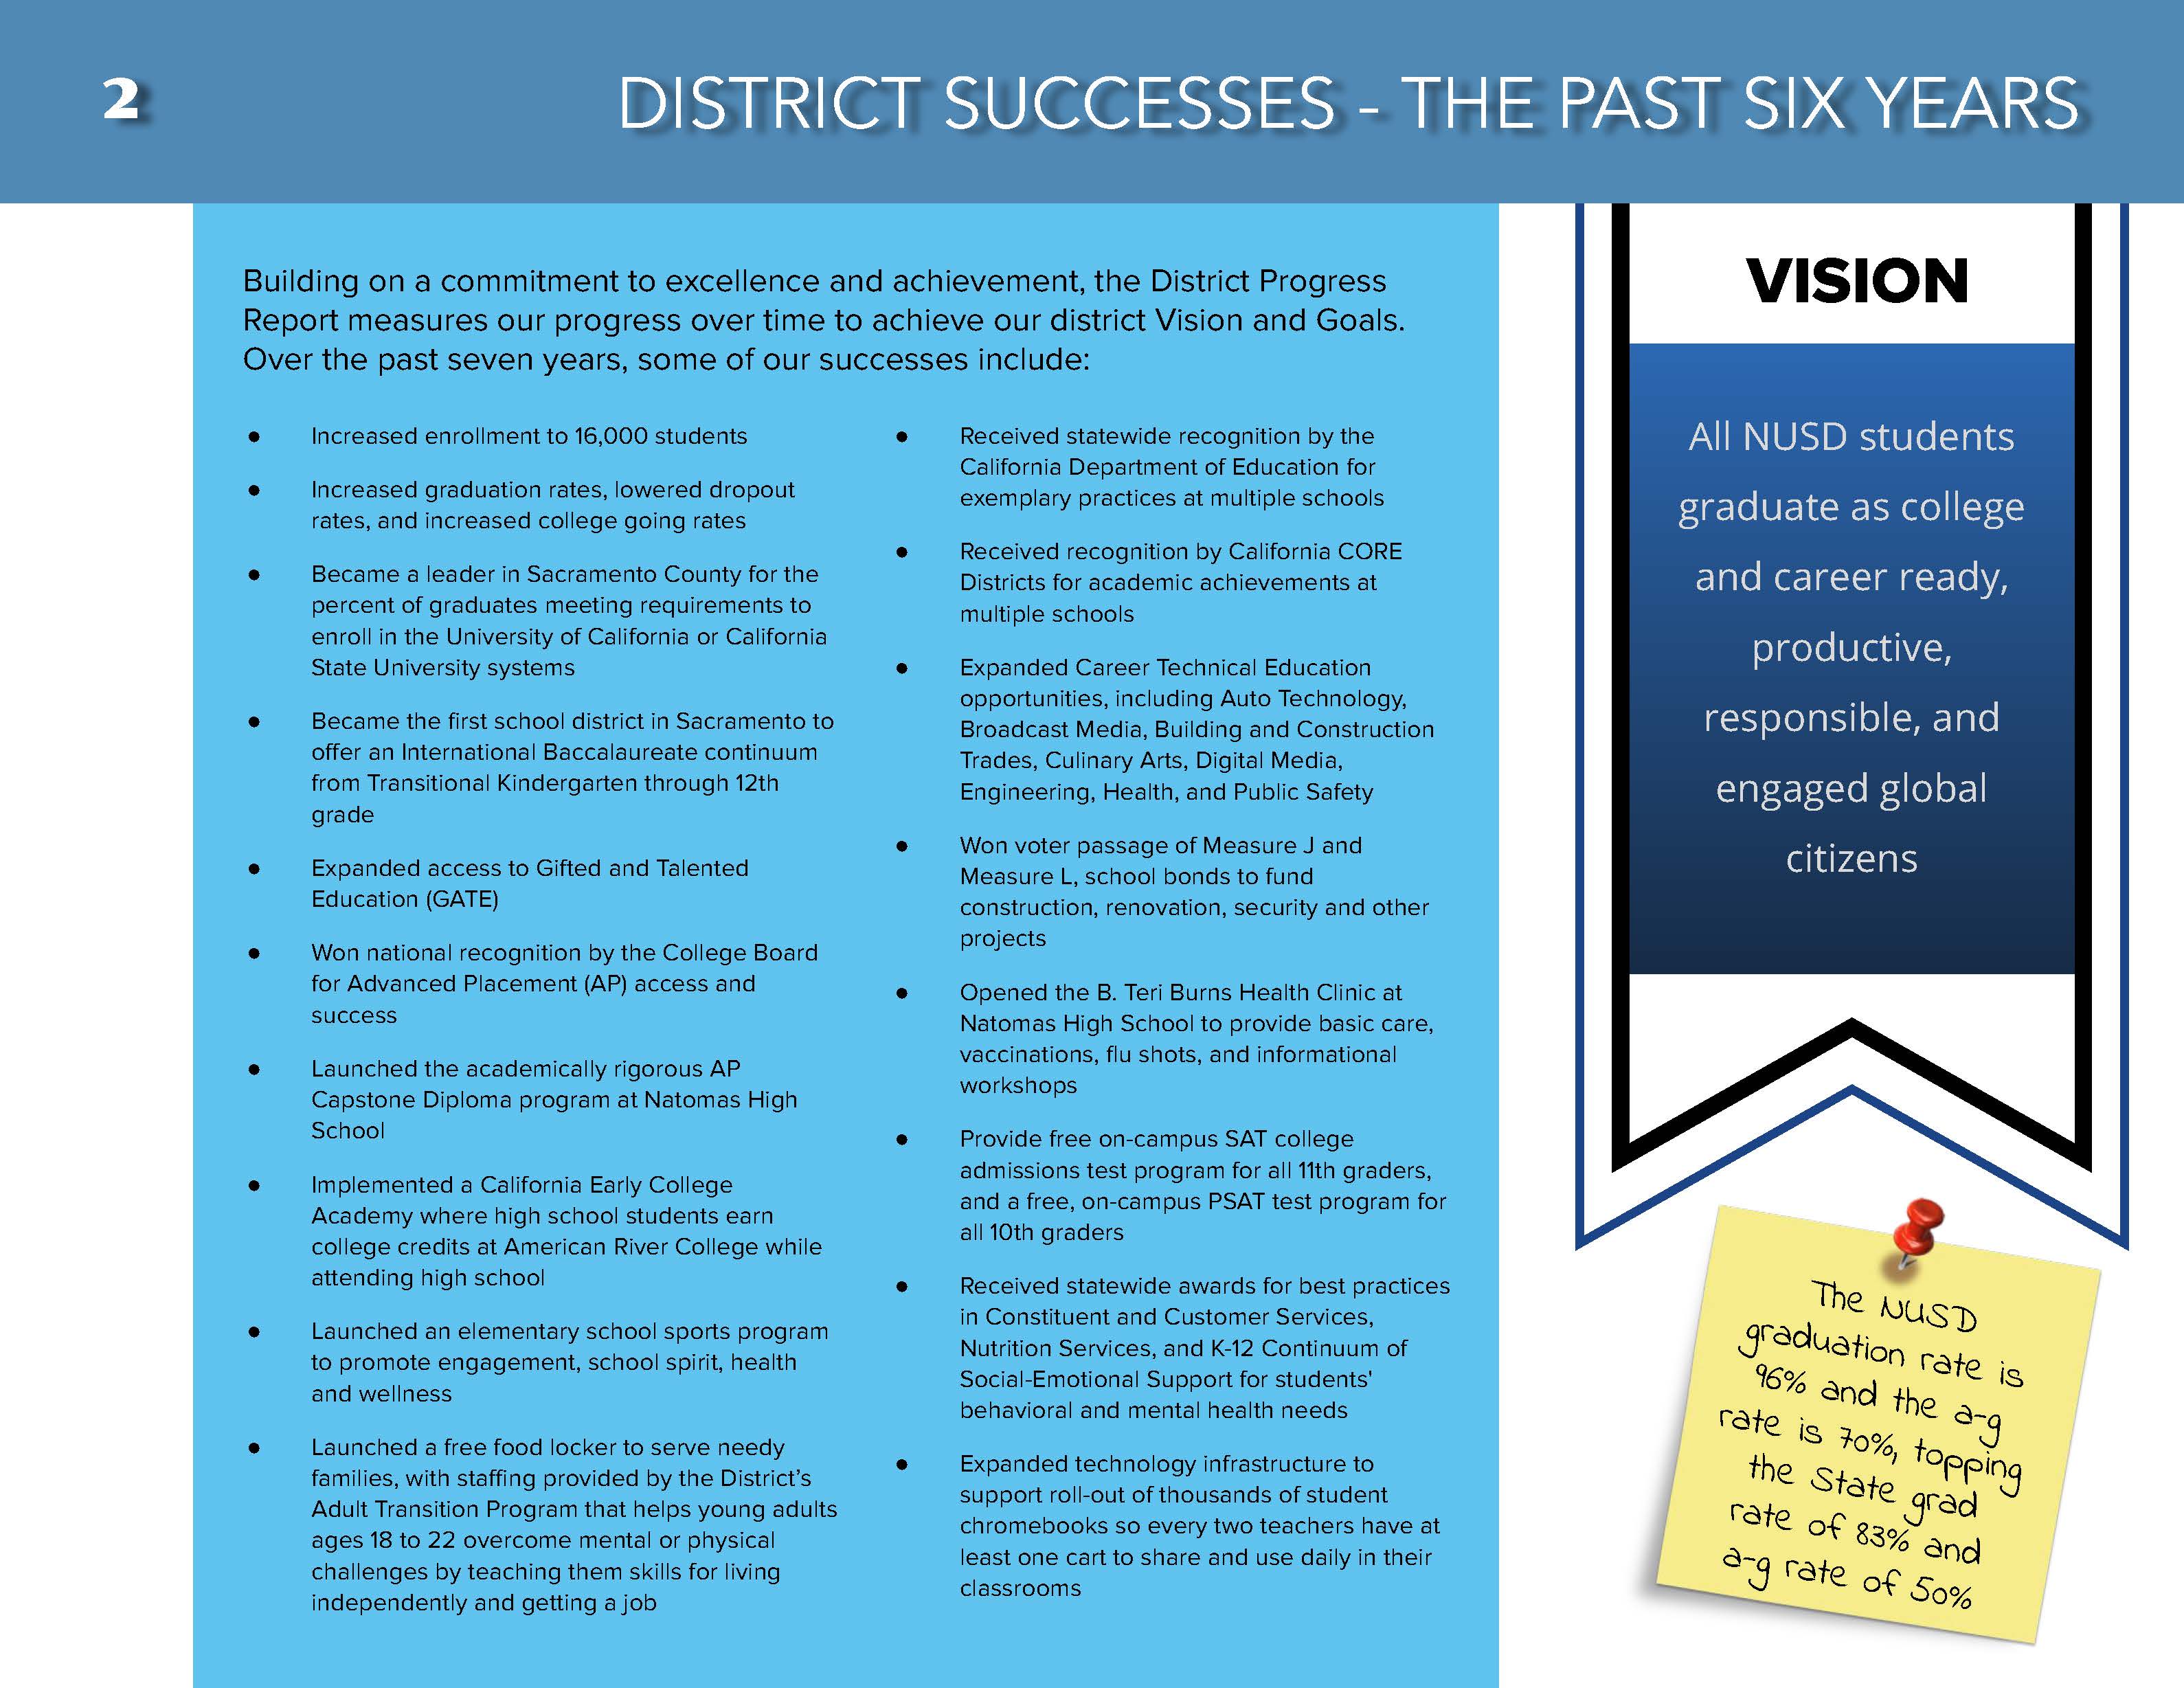 Page 3 of DPR - District Successes in the past six years